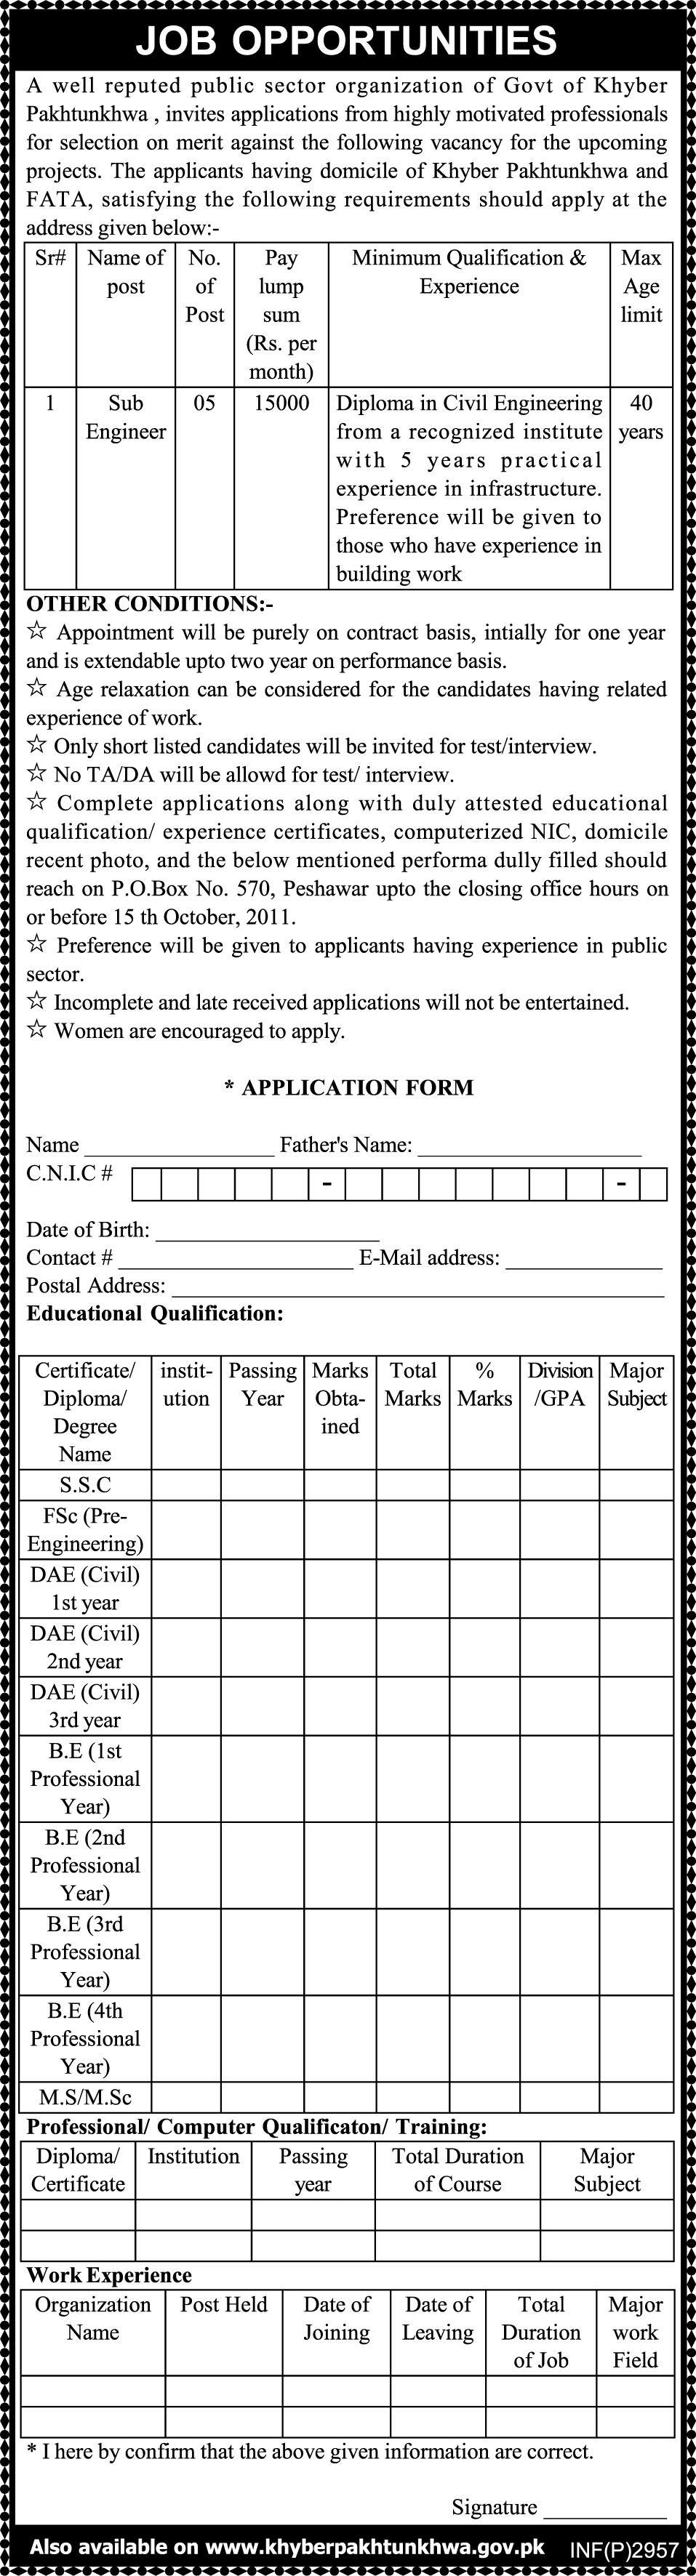 Sub Engineer Required by the Public Sector Organization of Govt of Khyber Pakhtunkhwa